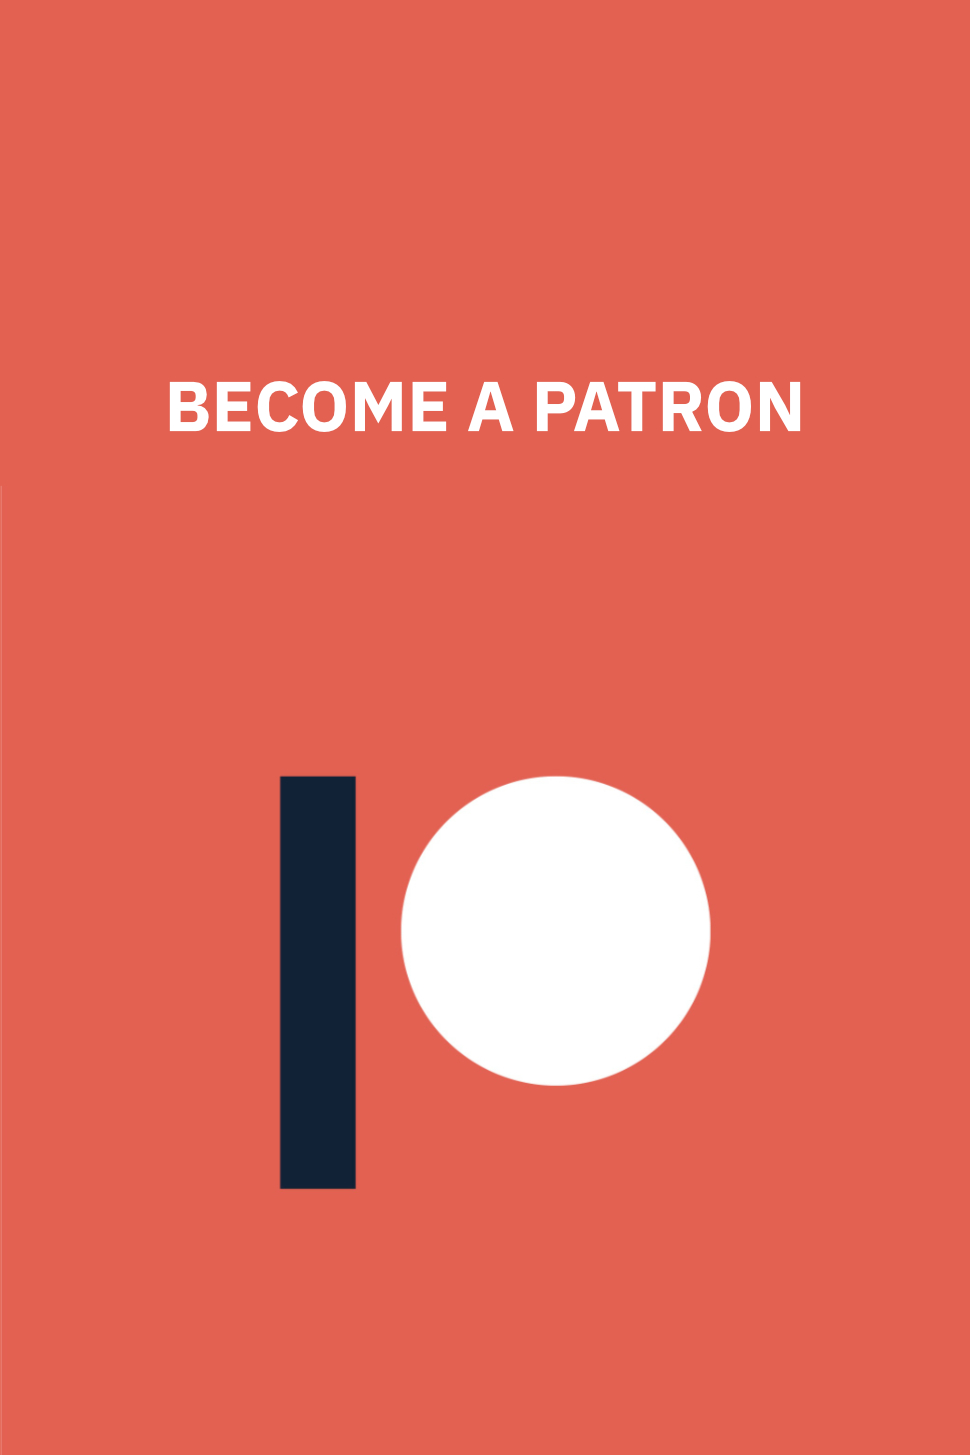 Become a Patreon supporter